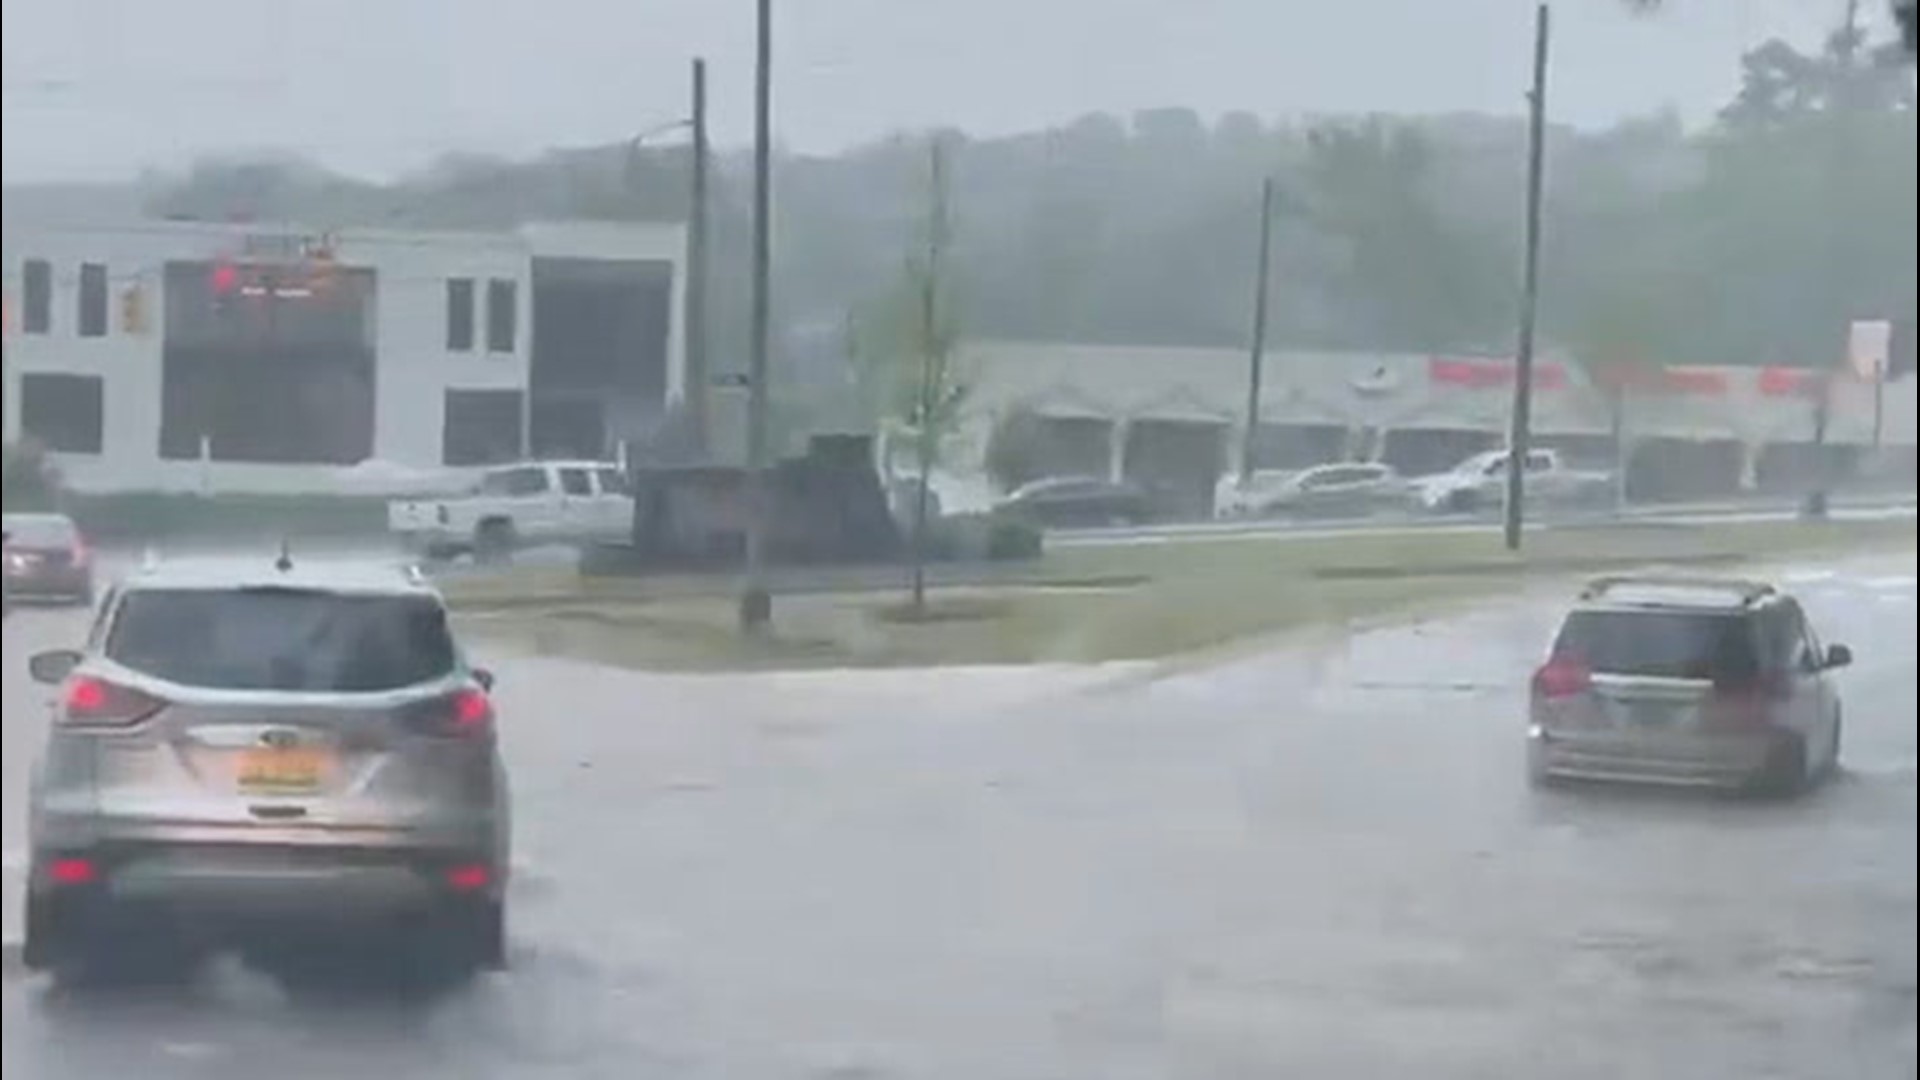 Severe thunderstorms swept through the Southeast on May 4, causing flash flooding across several states.